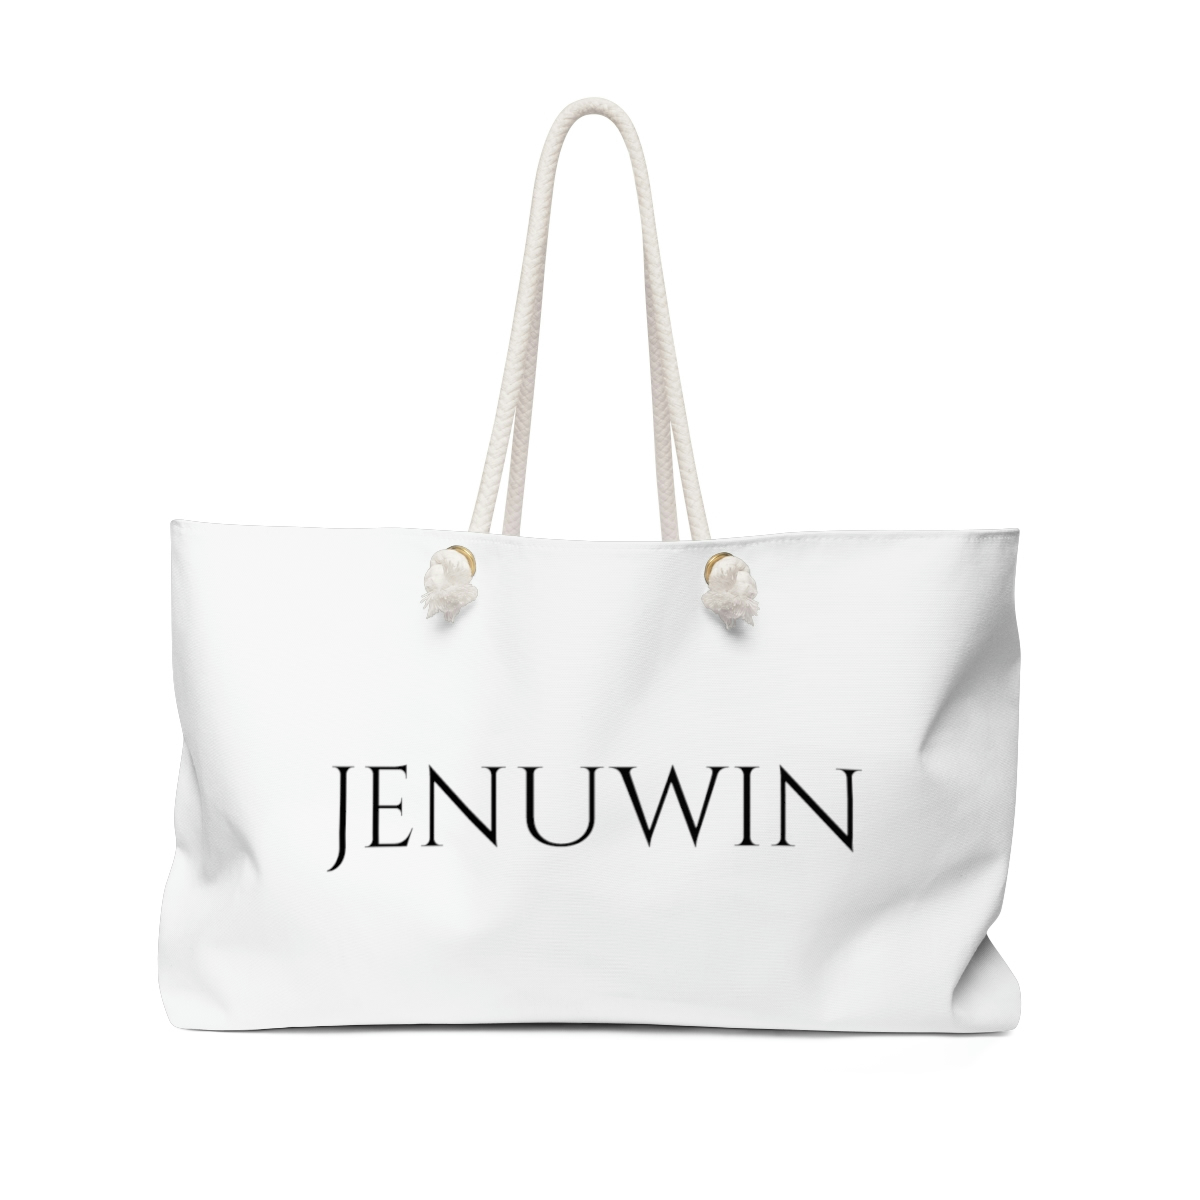 A white bag with the word jenuwin on it.